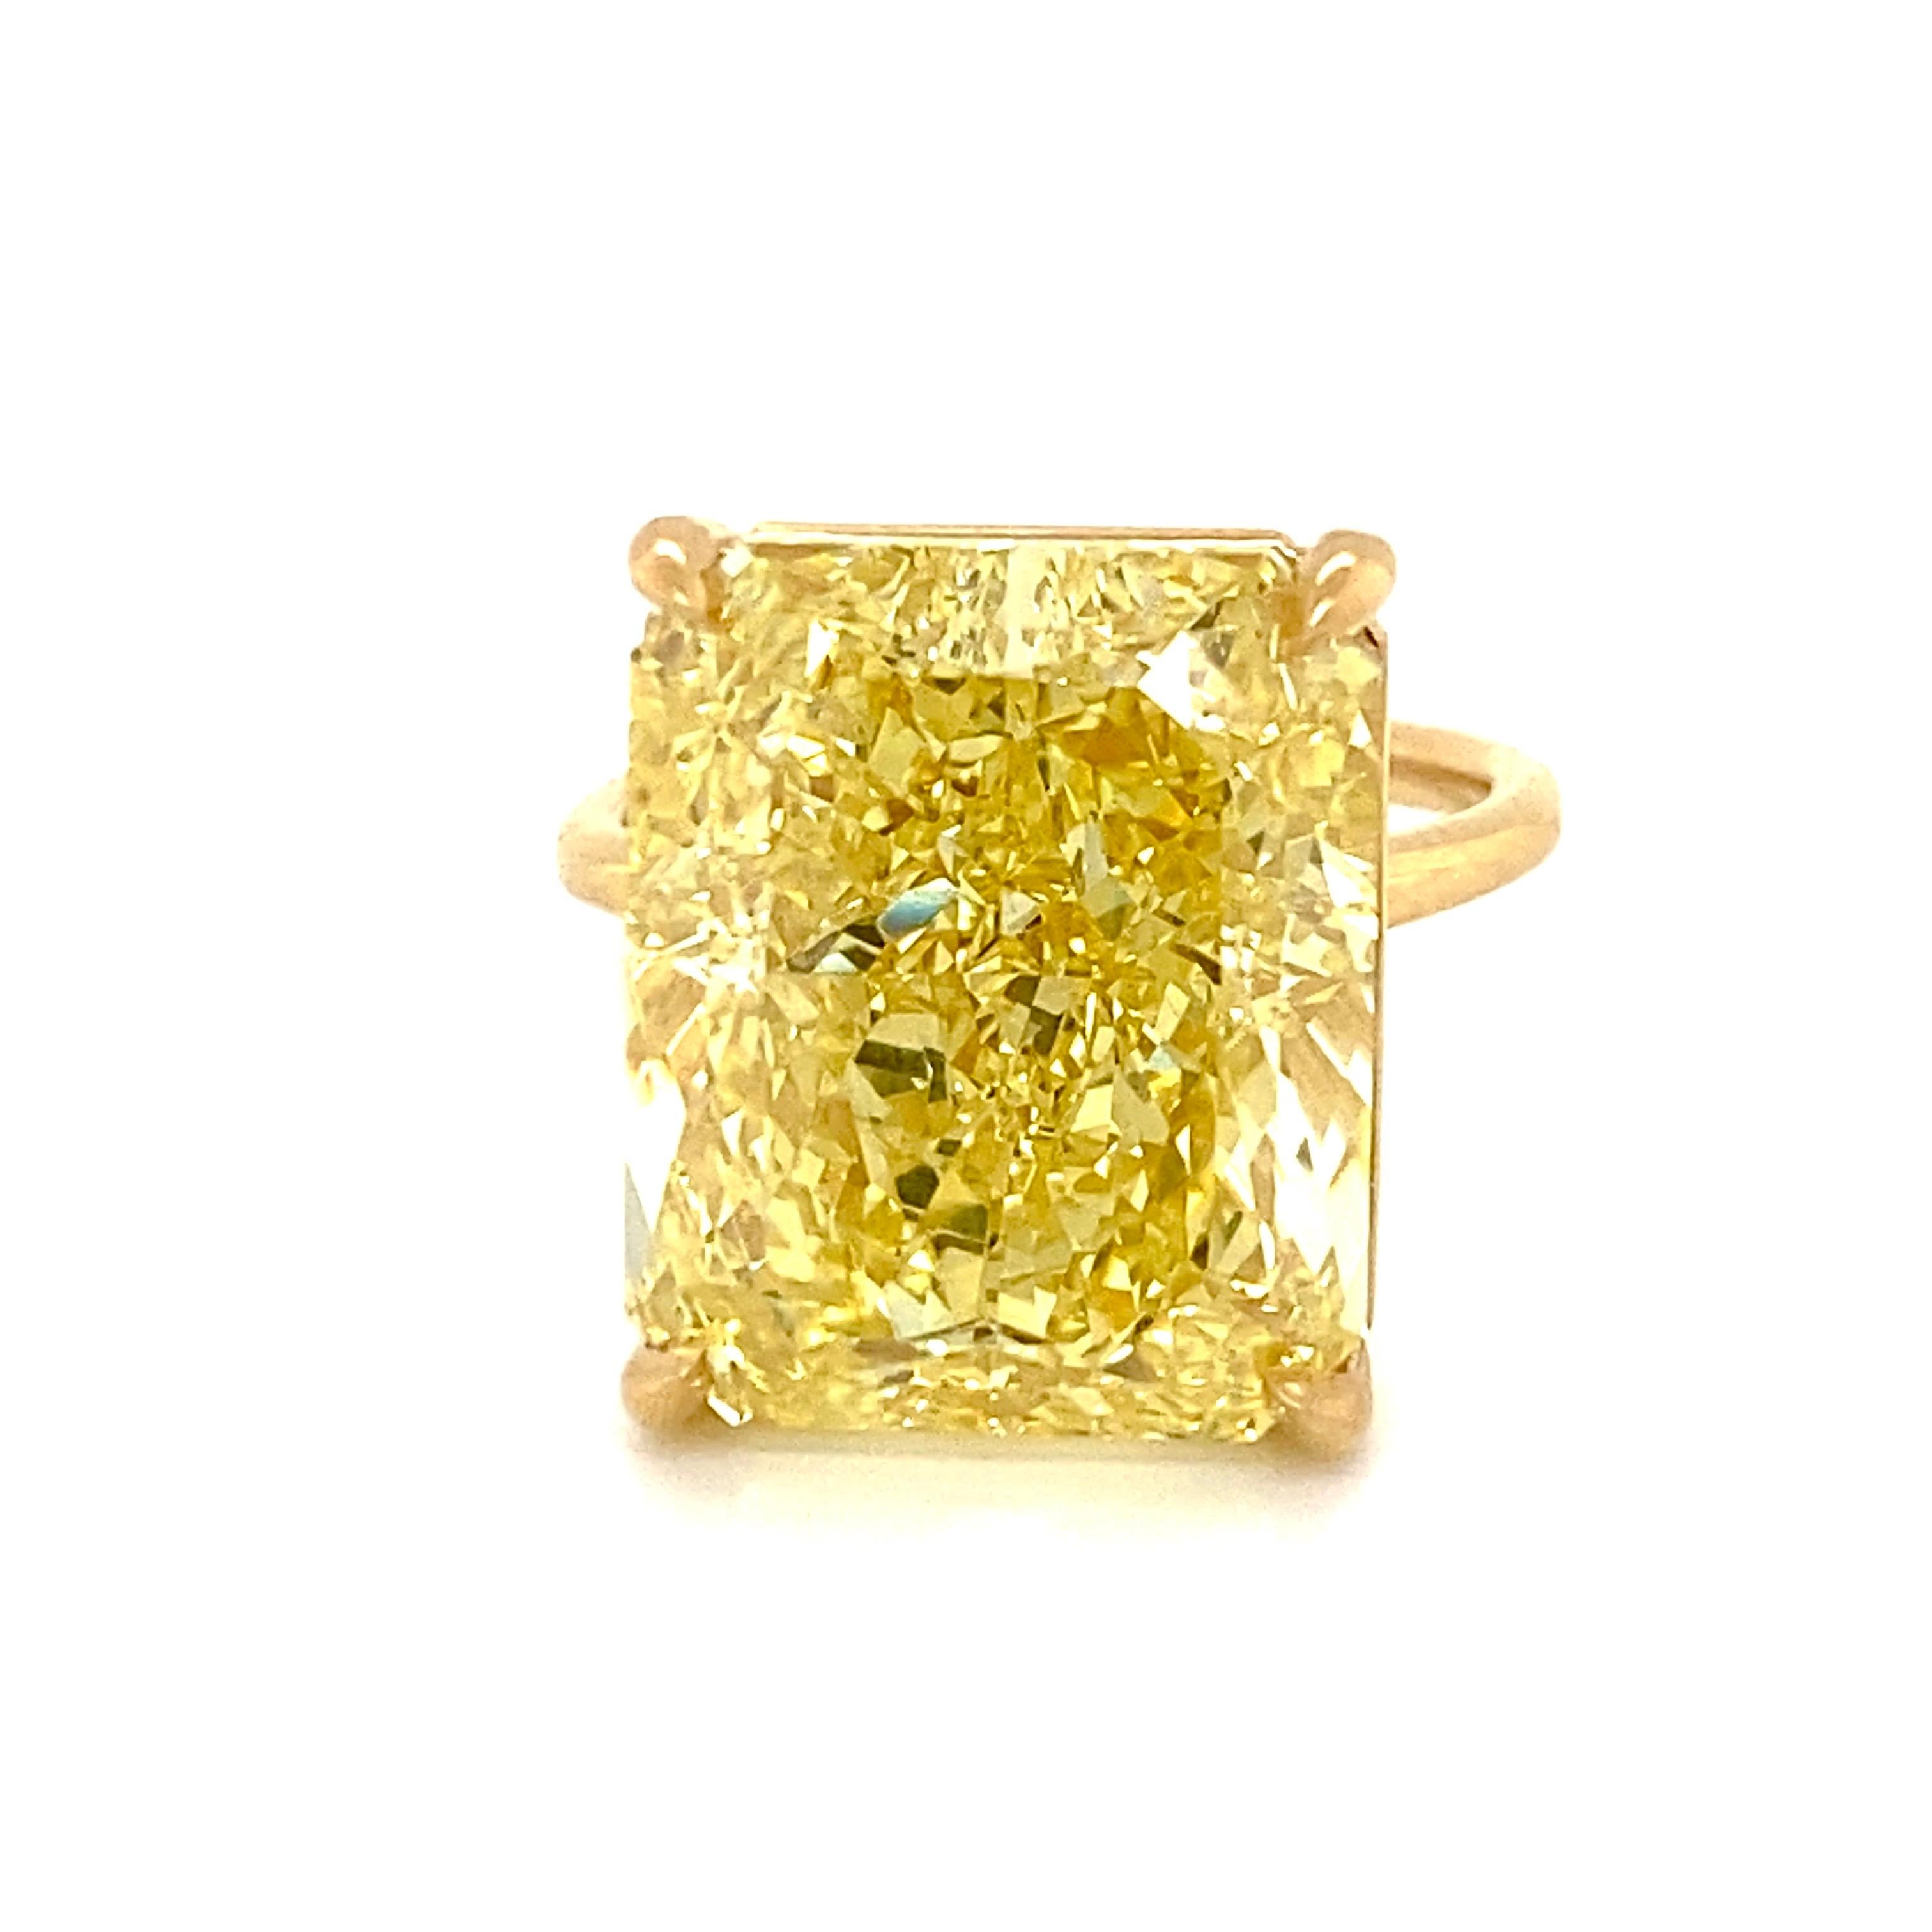 From the vault at Emilio Jewelry,

Featuring a magnificent 19.00 Carat + Elongated radiant cut fancy yellow diamond. The color saturation is very strong a must see, in our opinion with a visual comp to an intense. Please inquire for details. 
